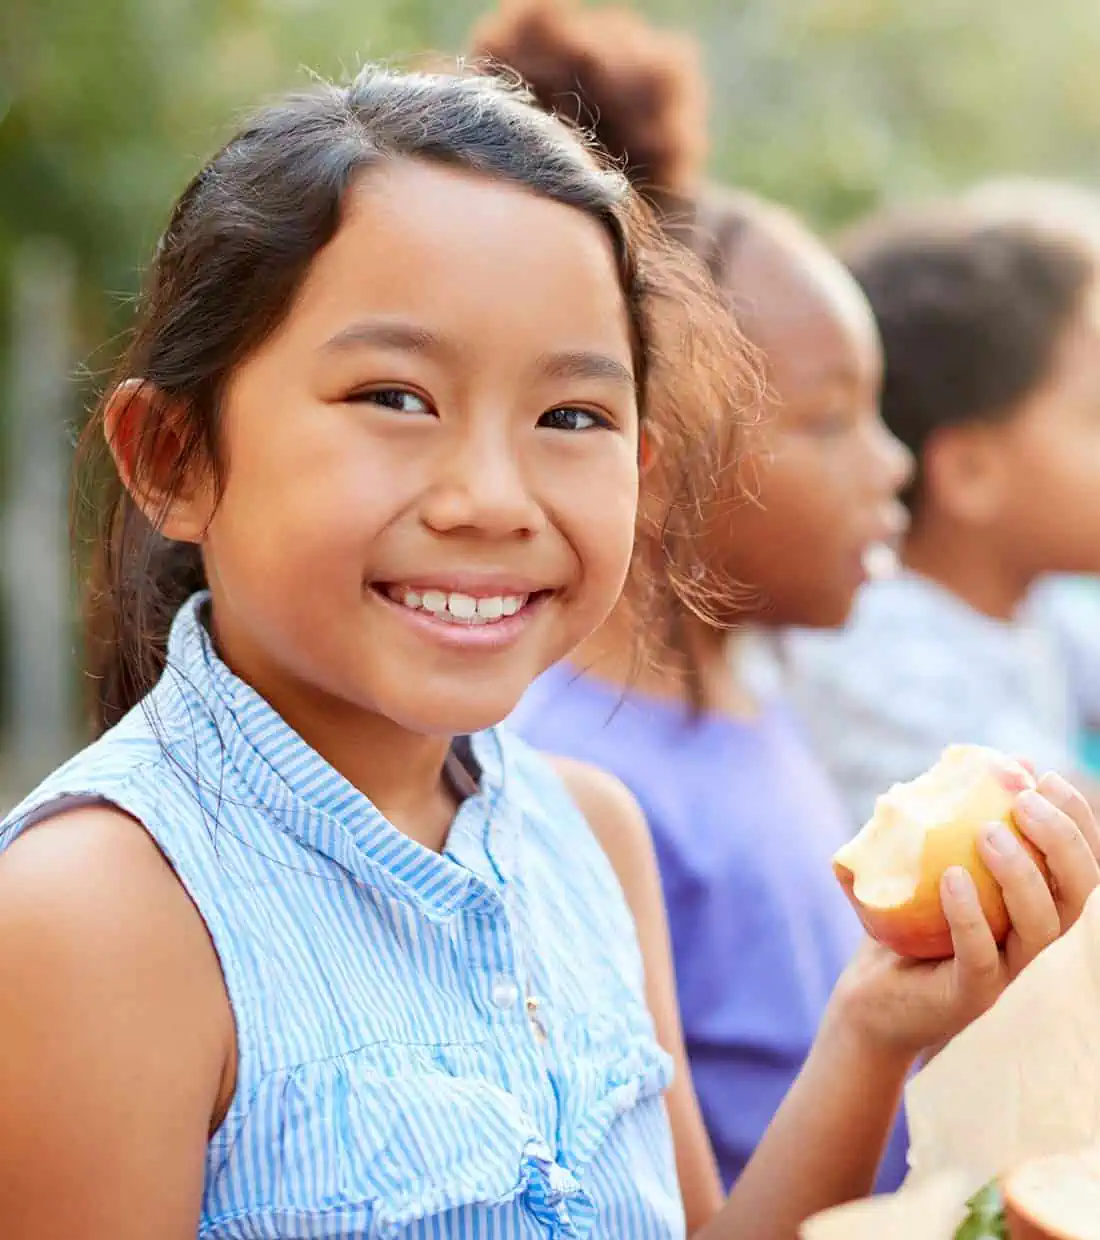 Young girl smiling at the camera with an apple in one hand